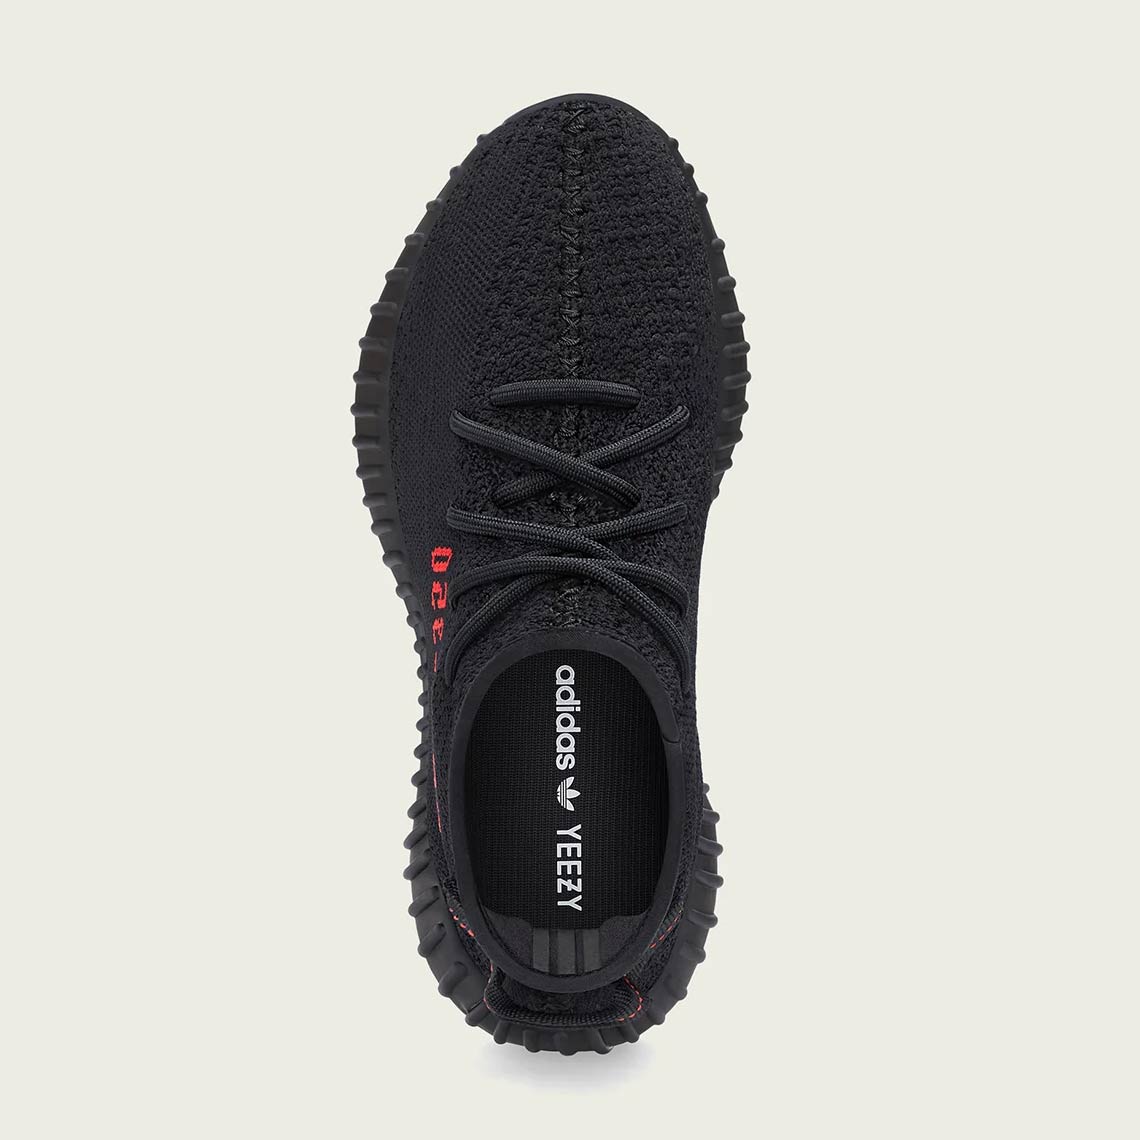 Adidas Yeezy Boost 350 V2 Bred Store List 1